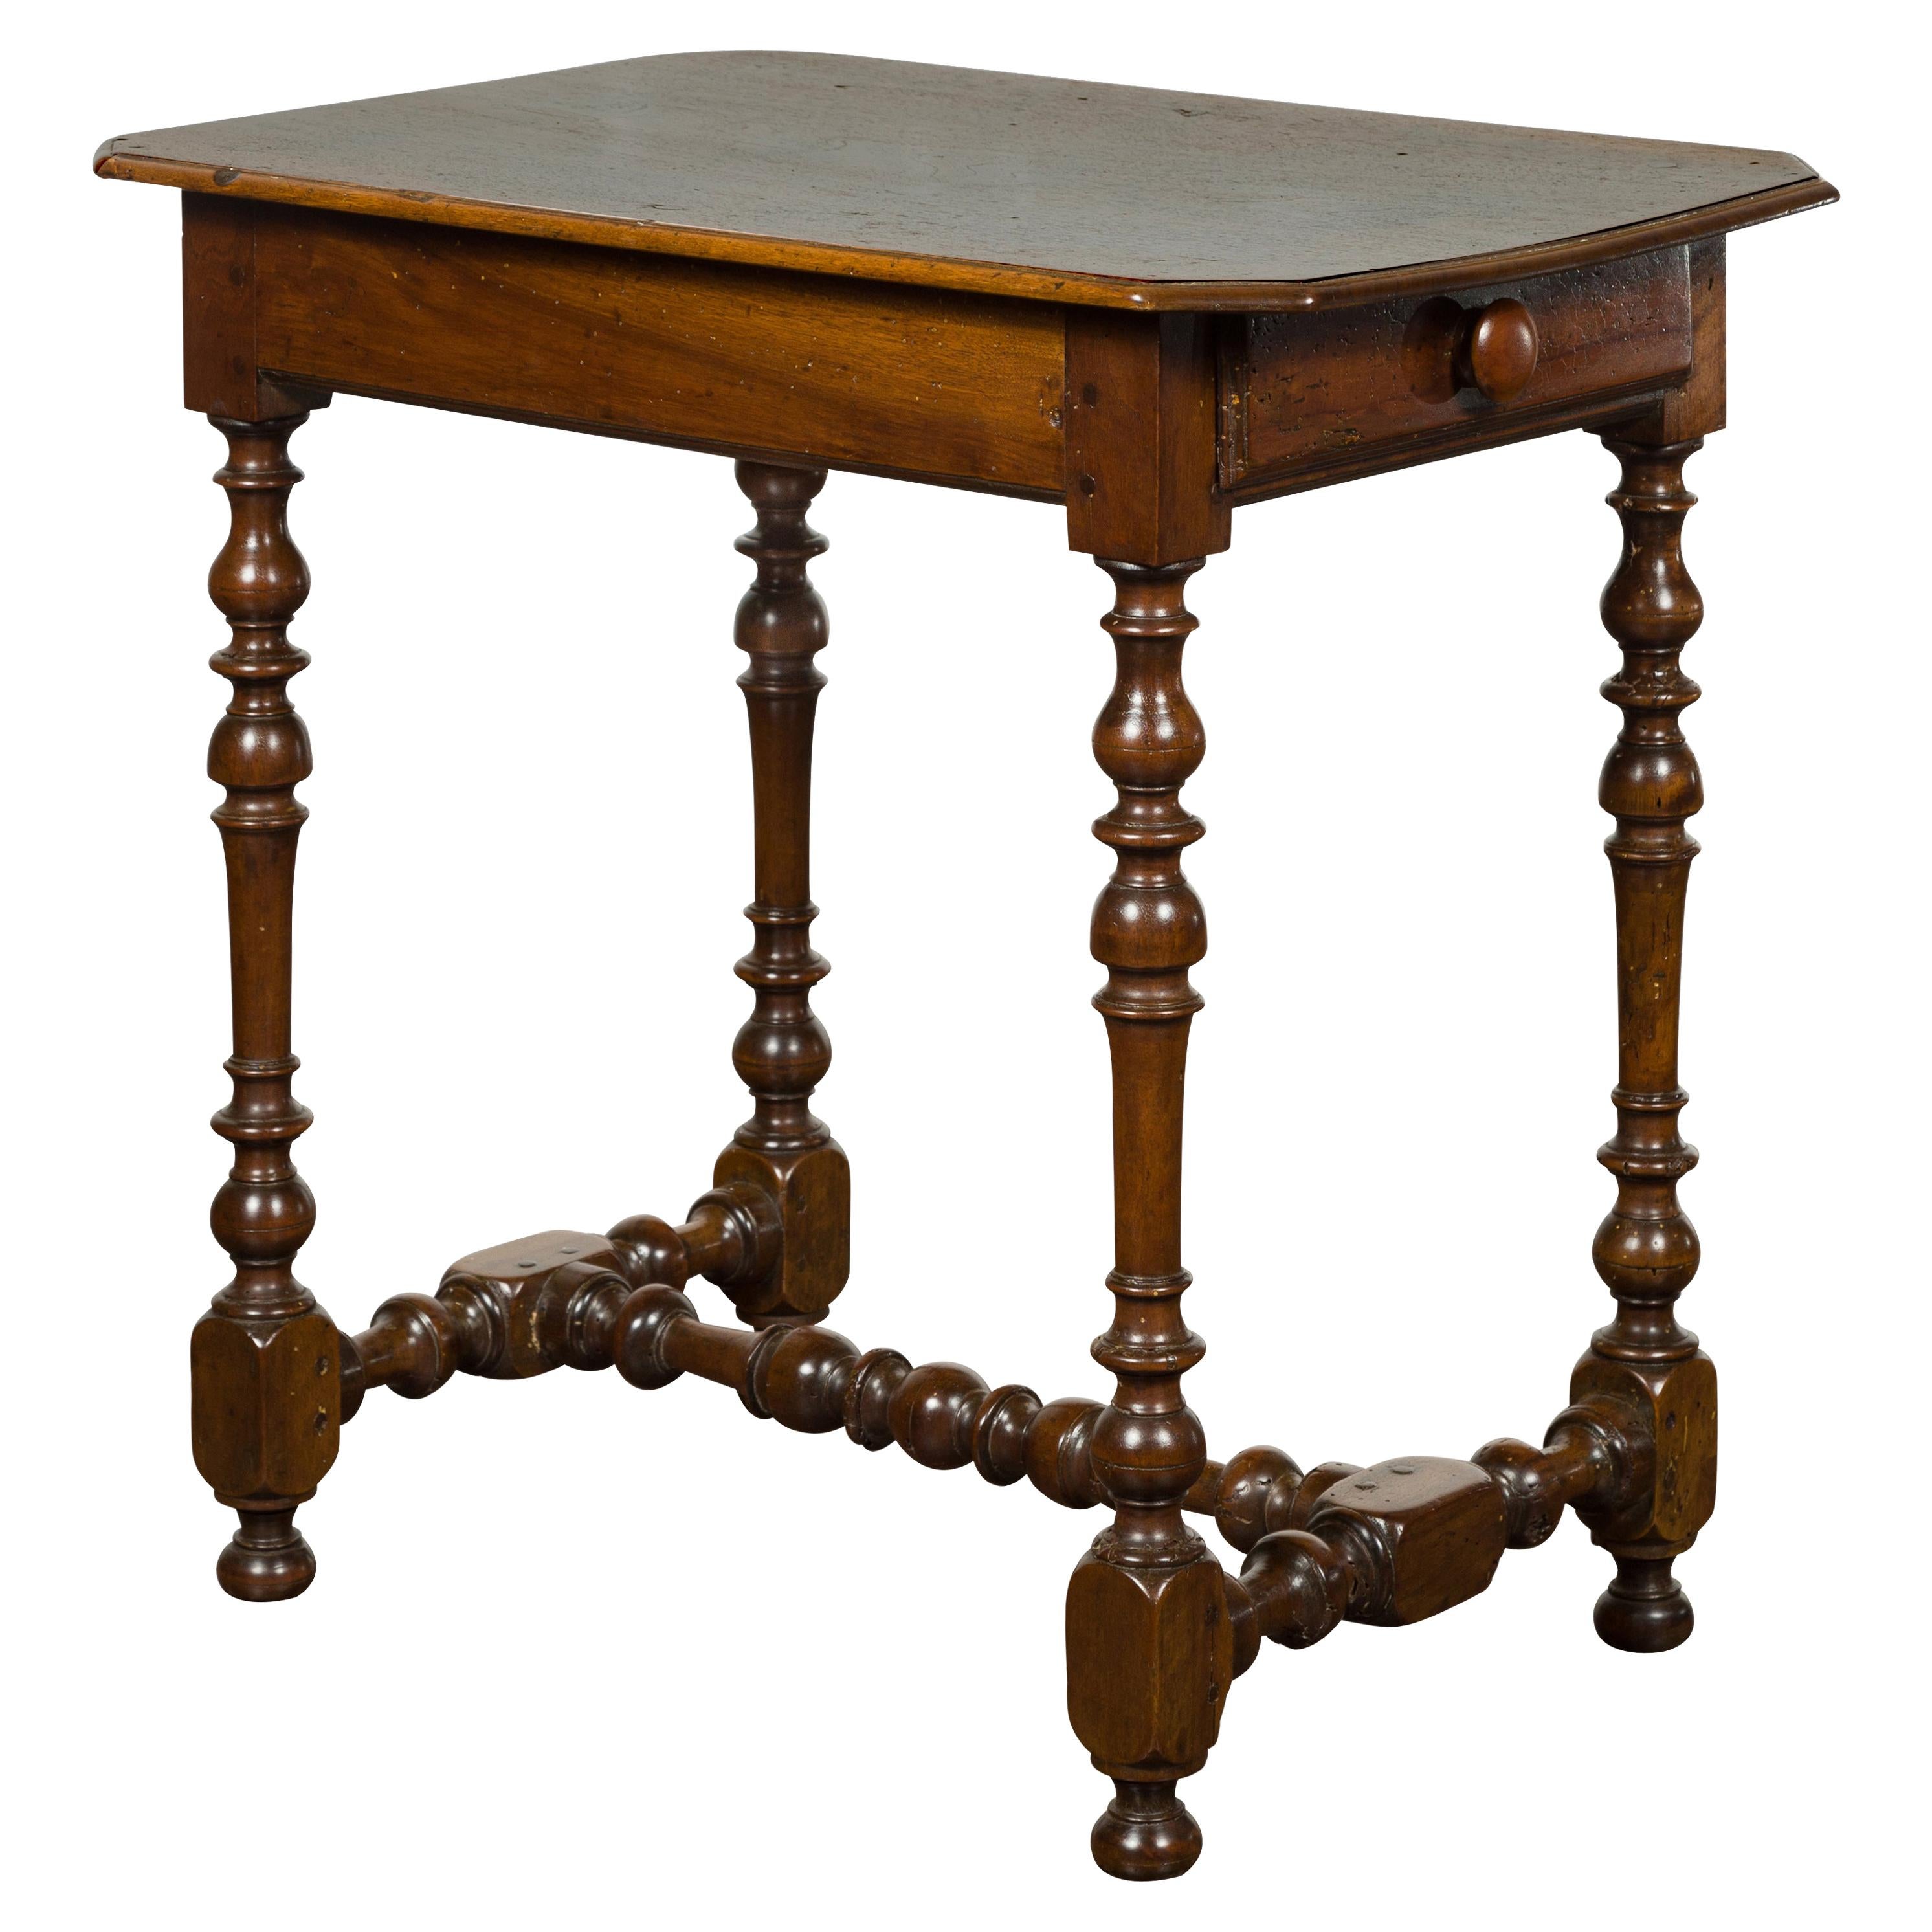 English 1810s George III Walnut Side Table with Single Drawer and Turned Legs